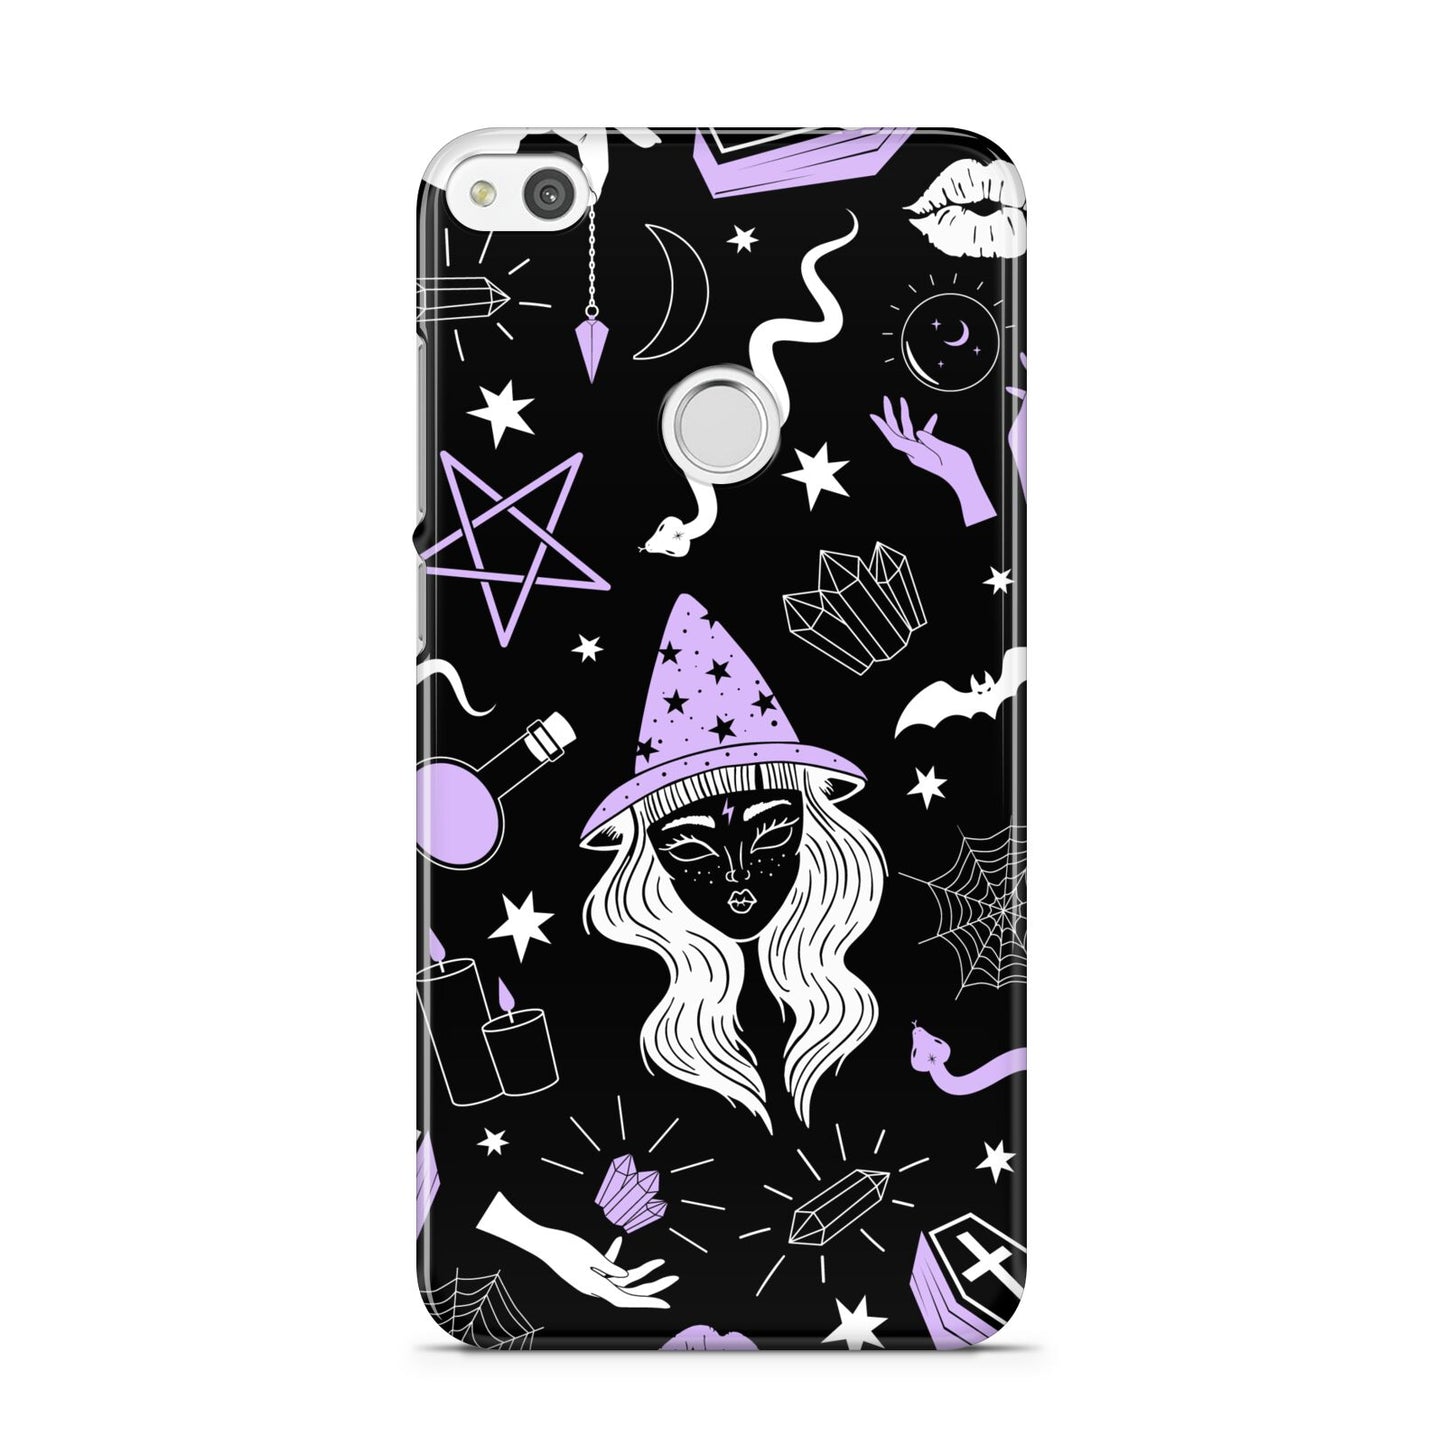 Witch Huawei P8 Lite Case